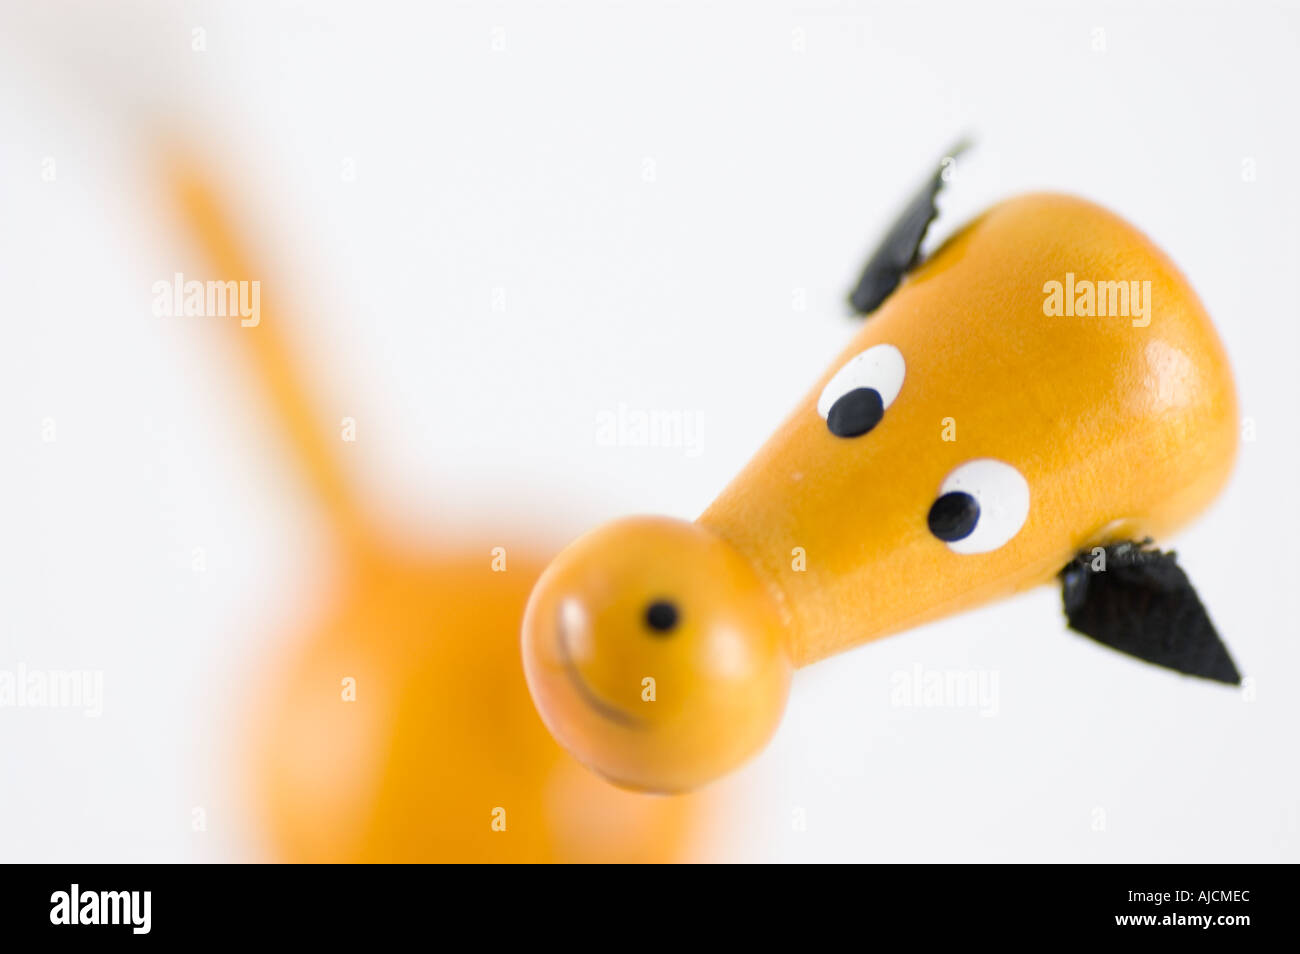 Close up view of a traditional wooden toy horse against a white background Stock Photo